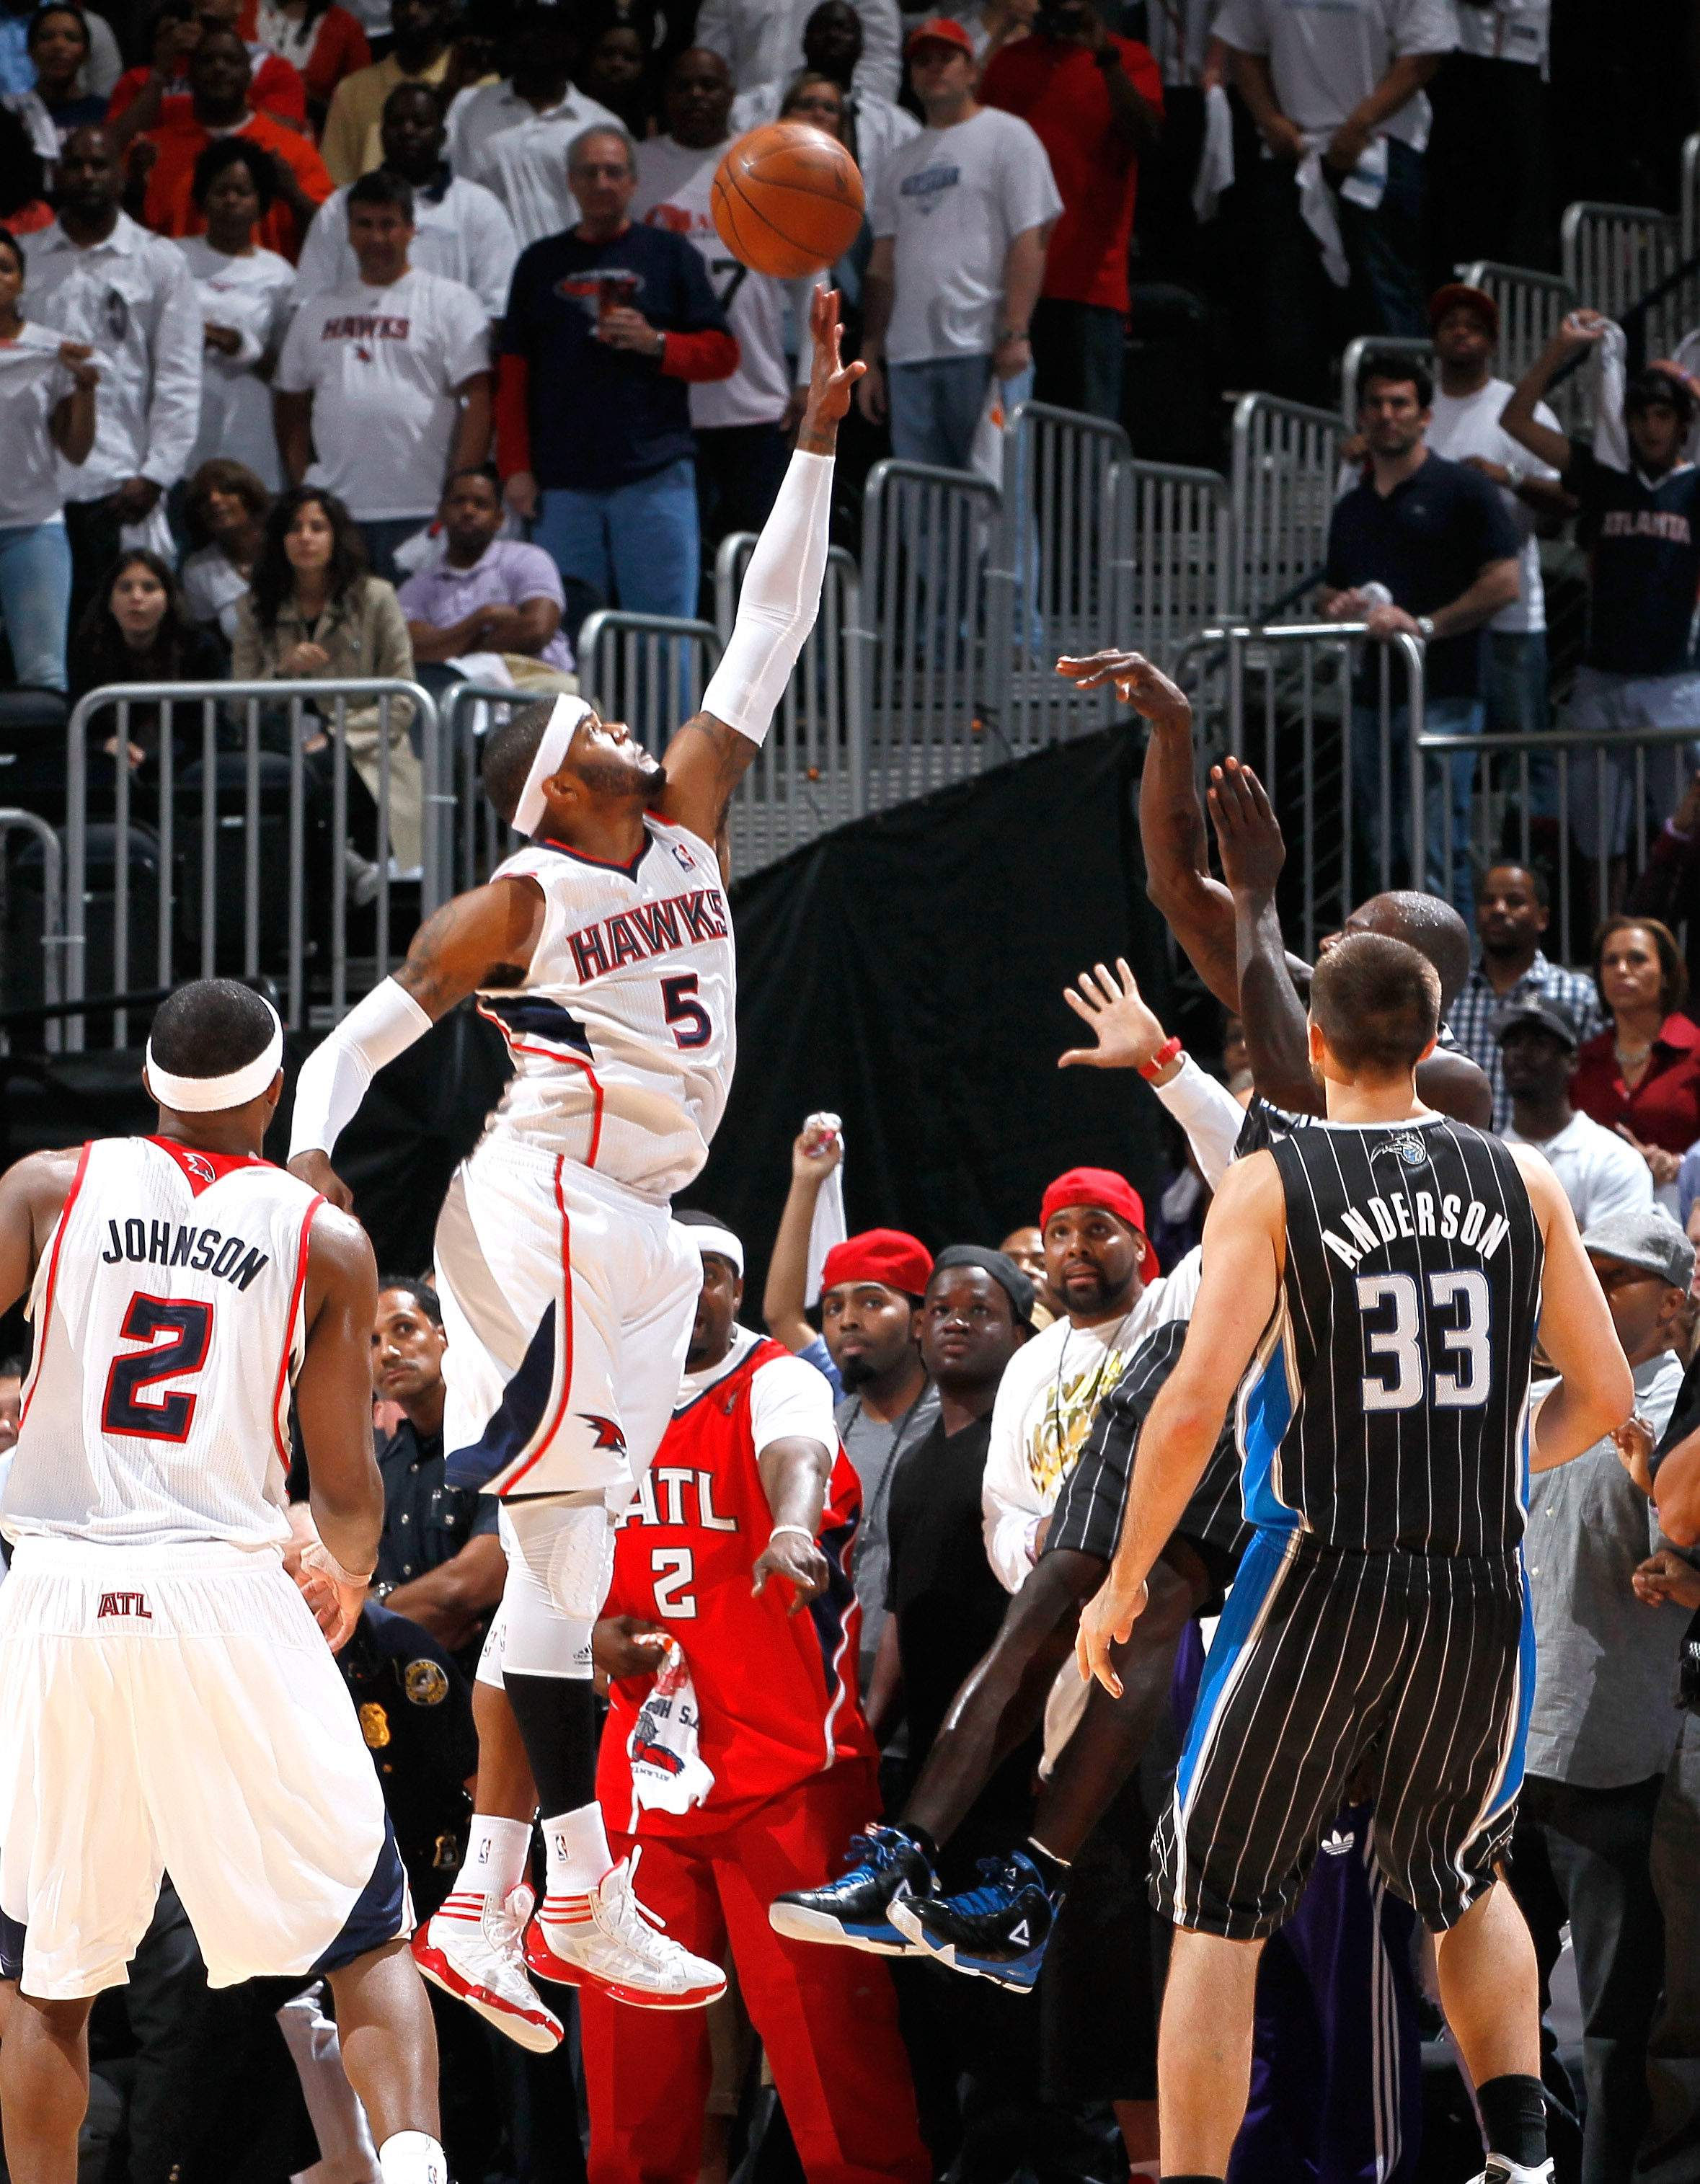 The game-winning block provided by Josh Smith.